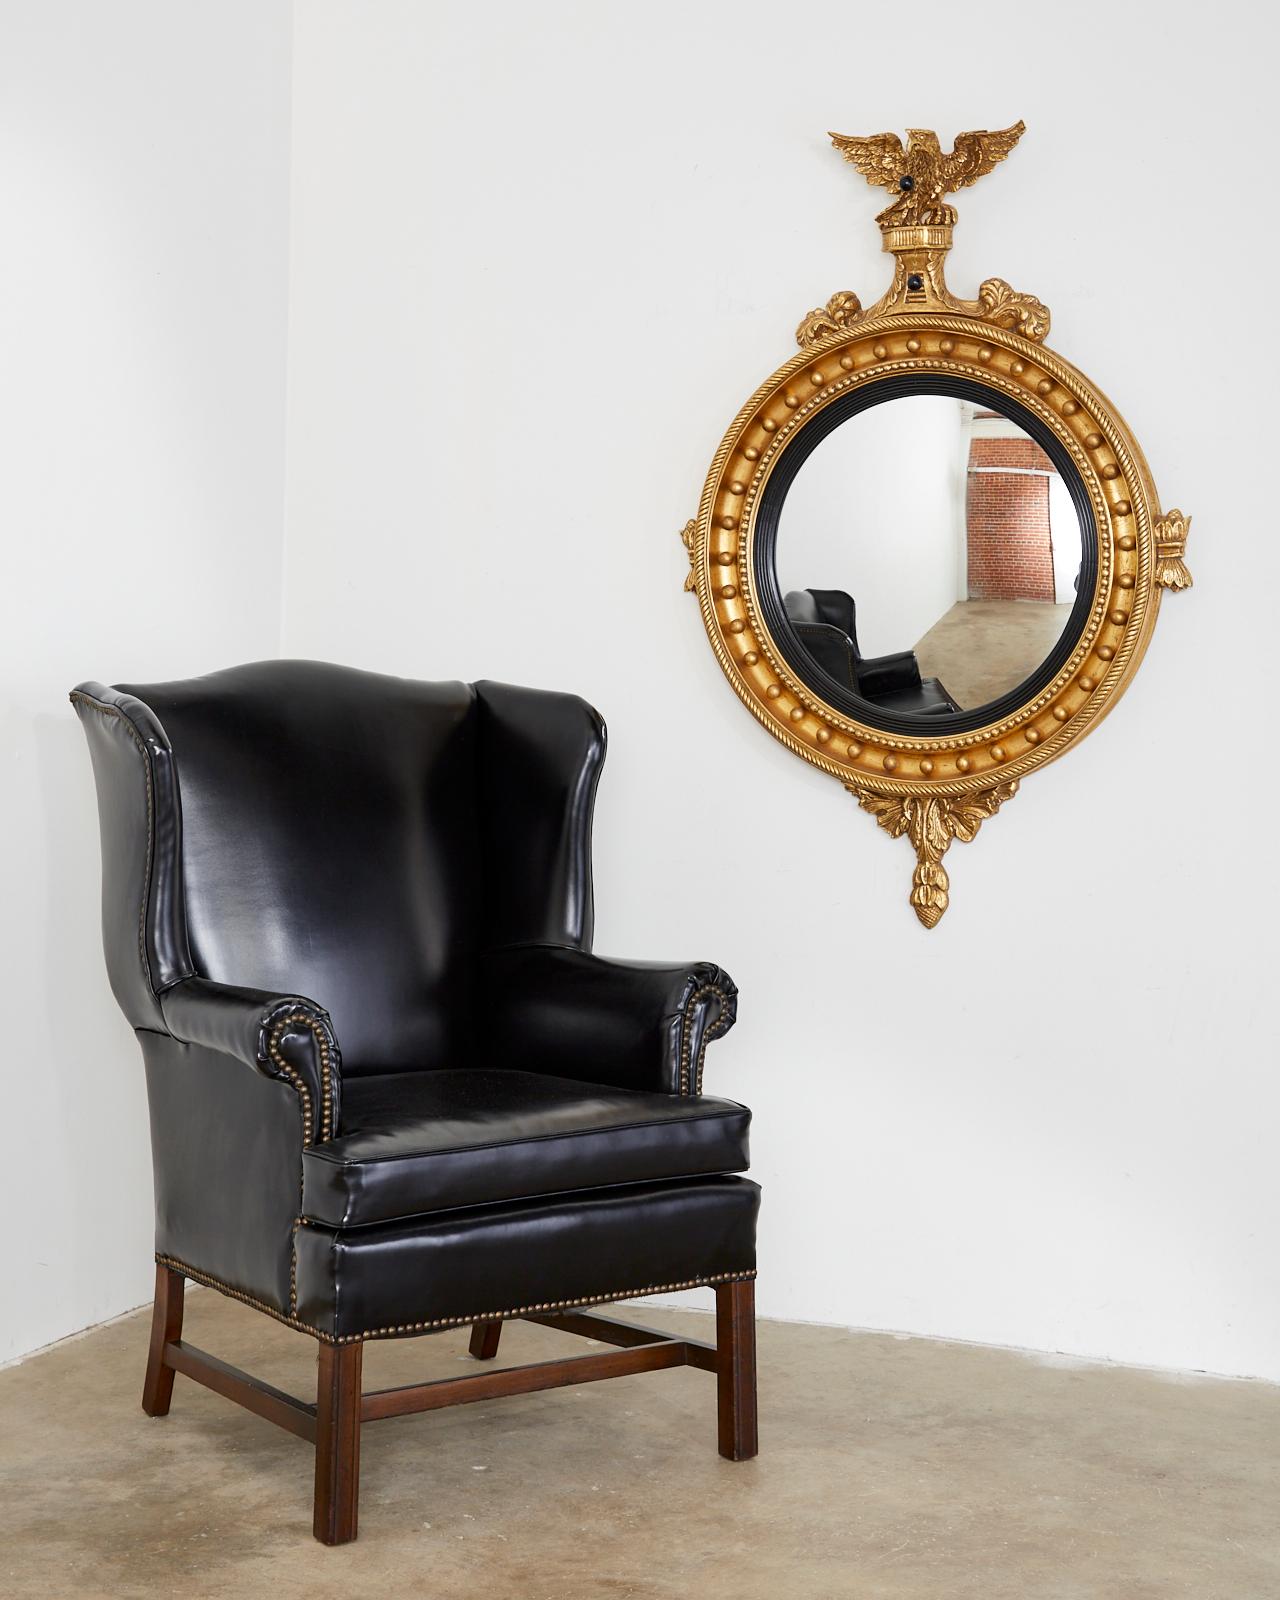 Sleek pair of English Georgian style wing chairs or wingbacks featuring black patent leather style naugahyde upholstery. Beautifully crafted mahogany frames with fully developed wings and brass tack nail heads borders. Supported by square reeded